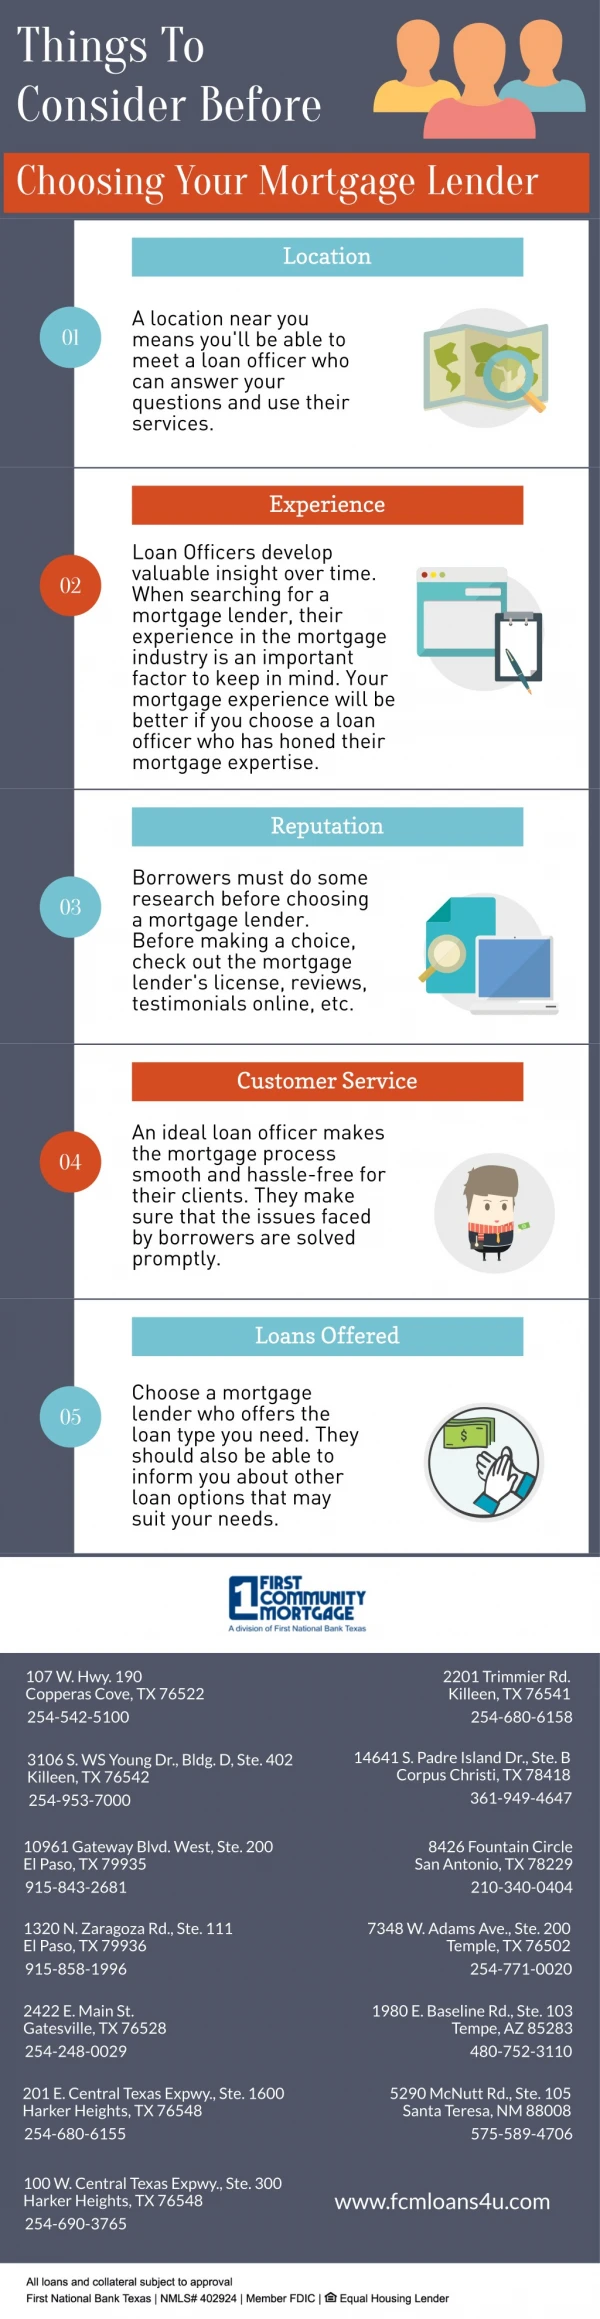 Things To Consider Before Choosing Your Mortgage Lender